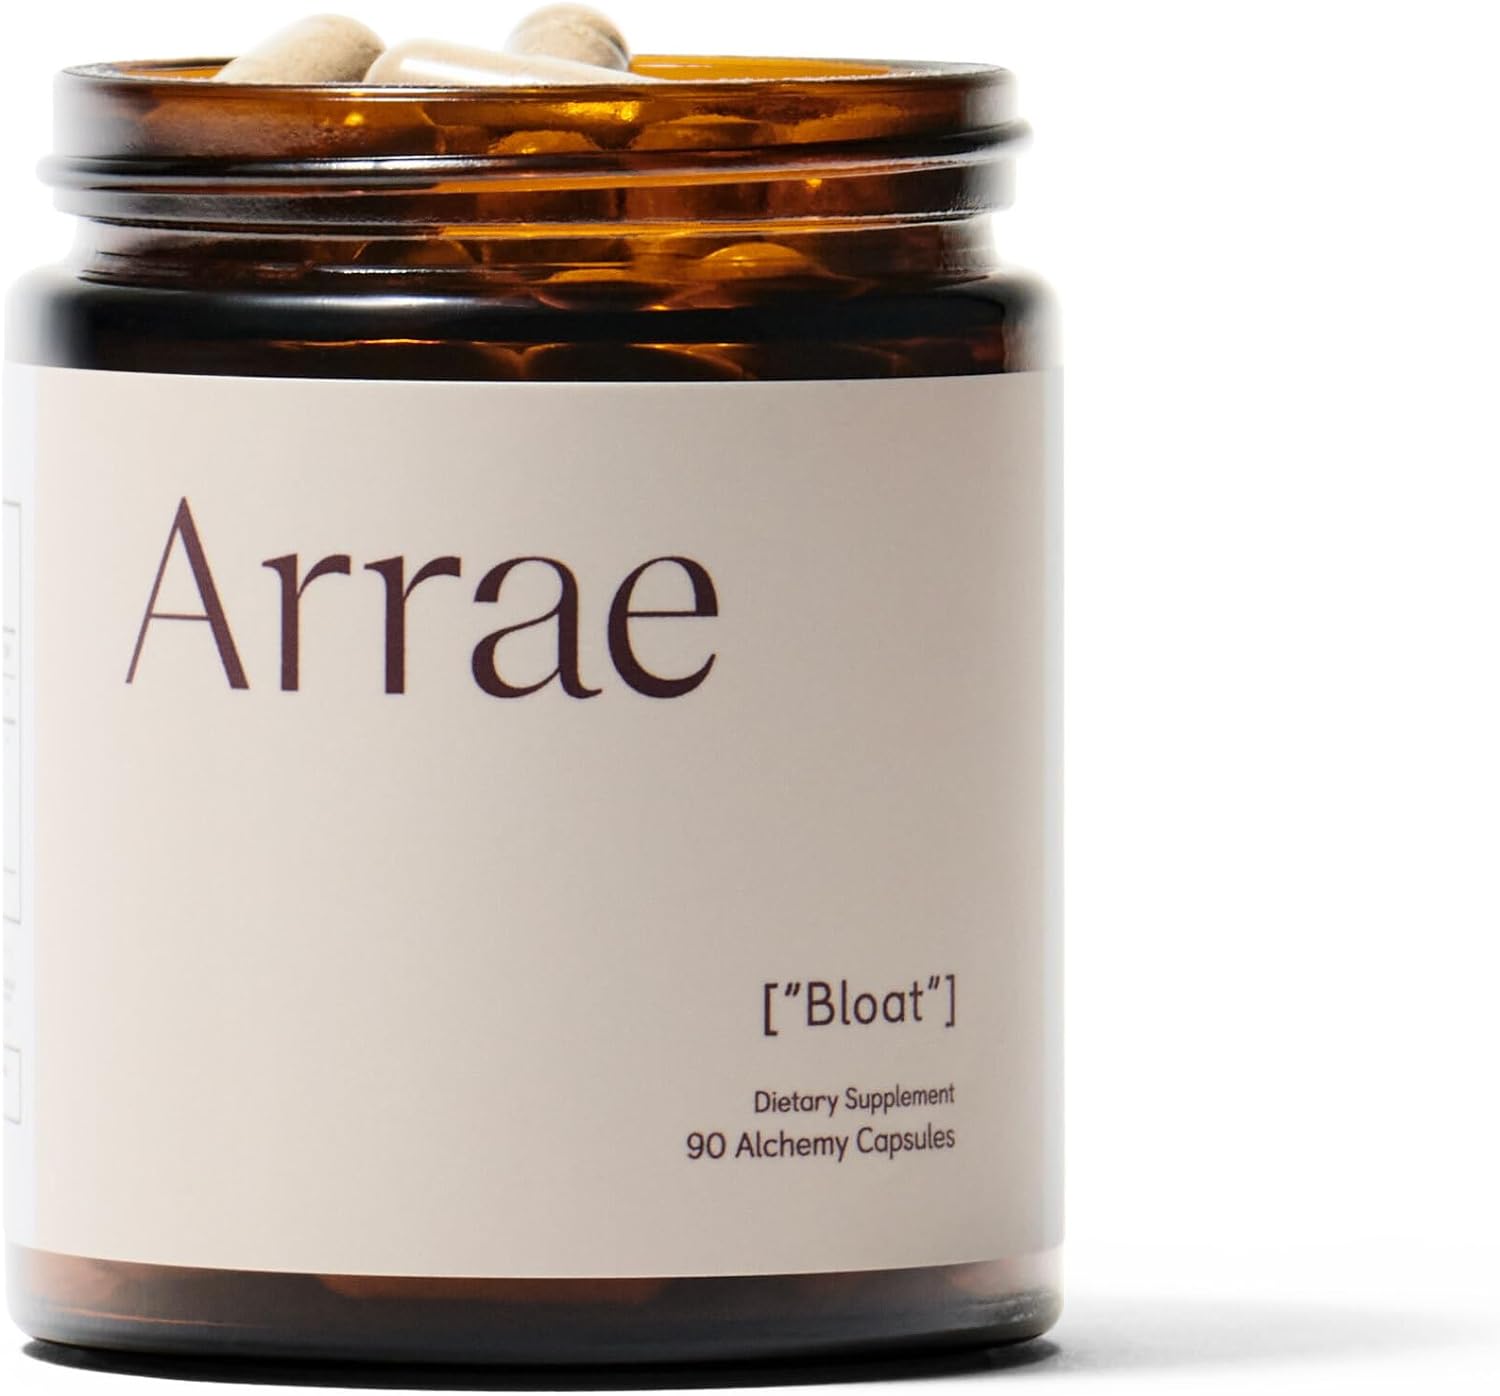 Digestive Enzymes | Arrae Fast-Acting Bloating Relief, 90 Capsules